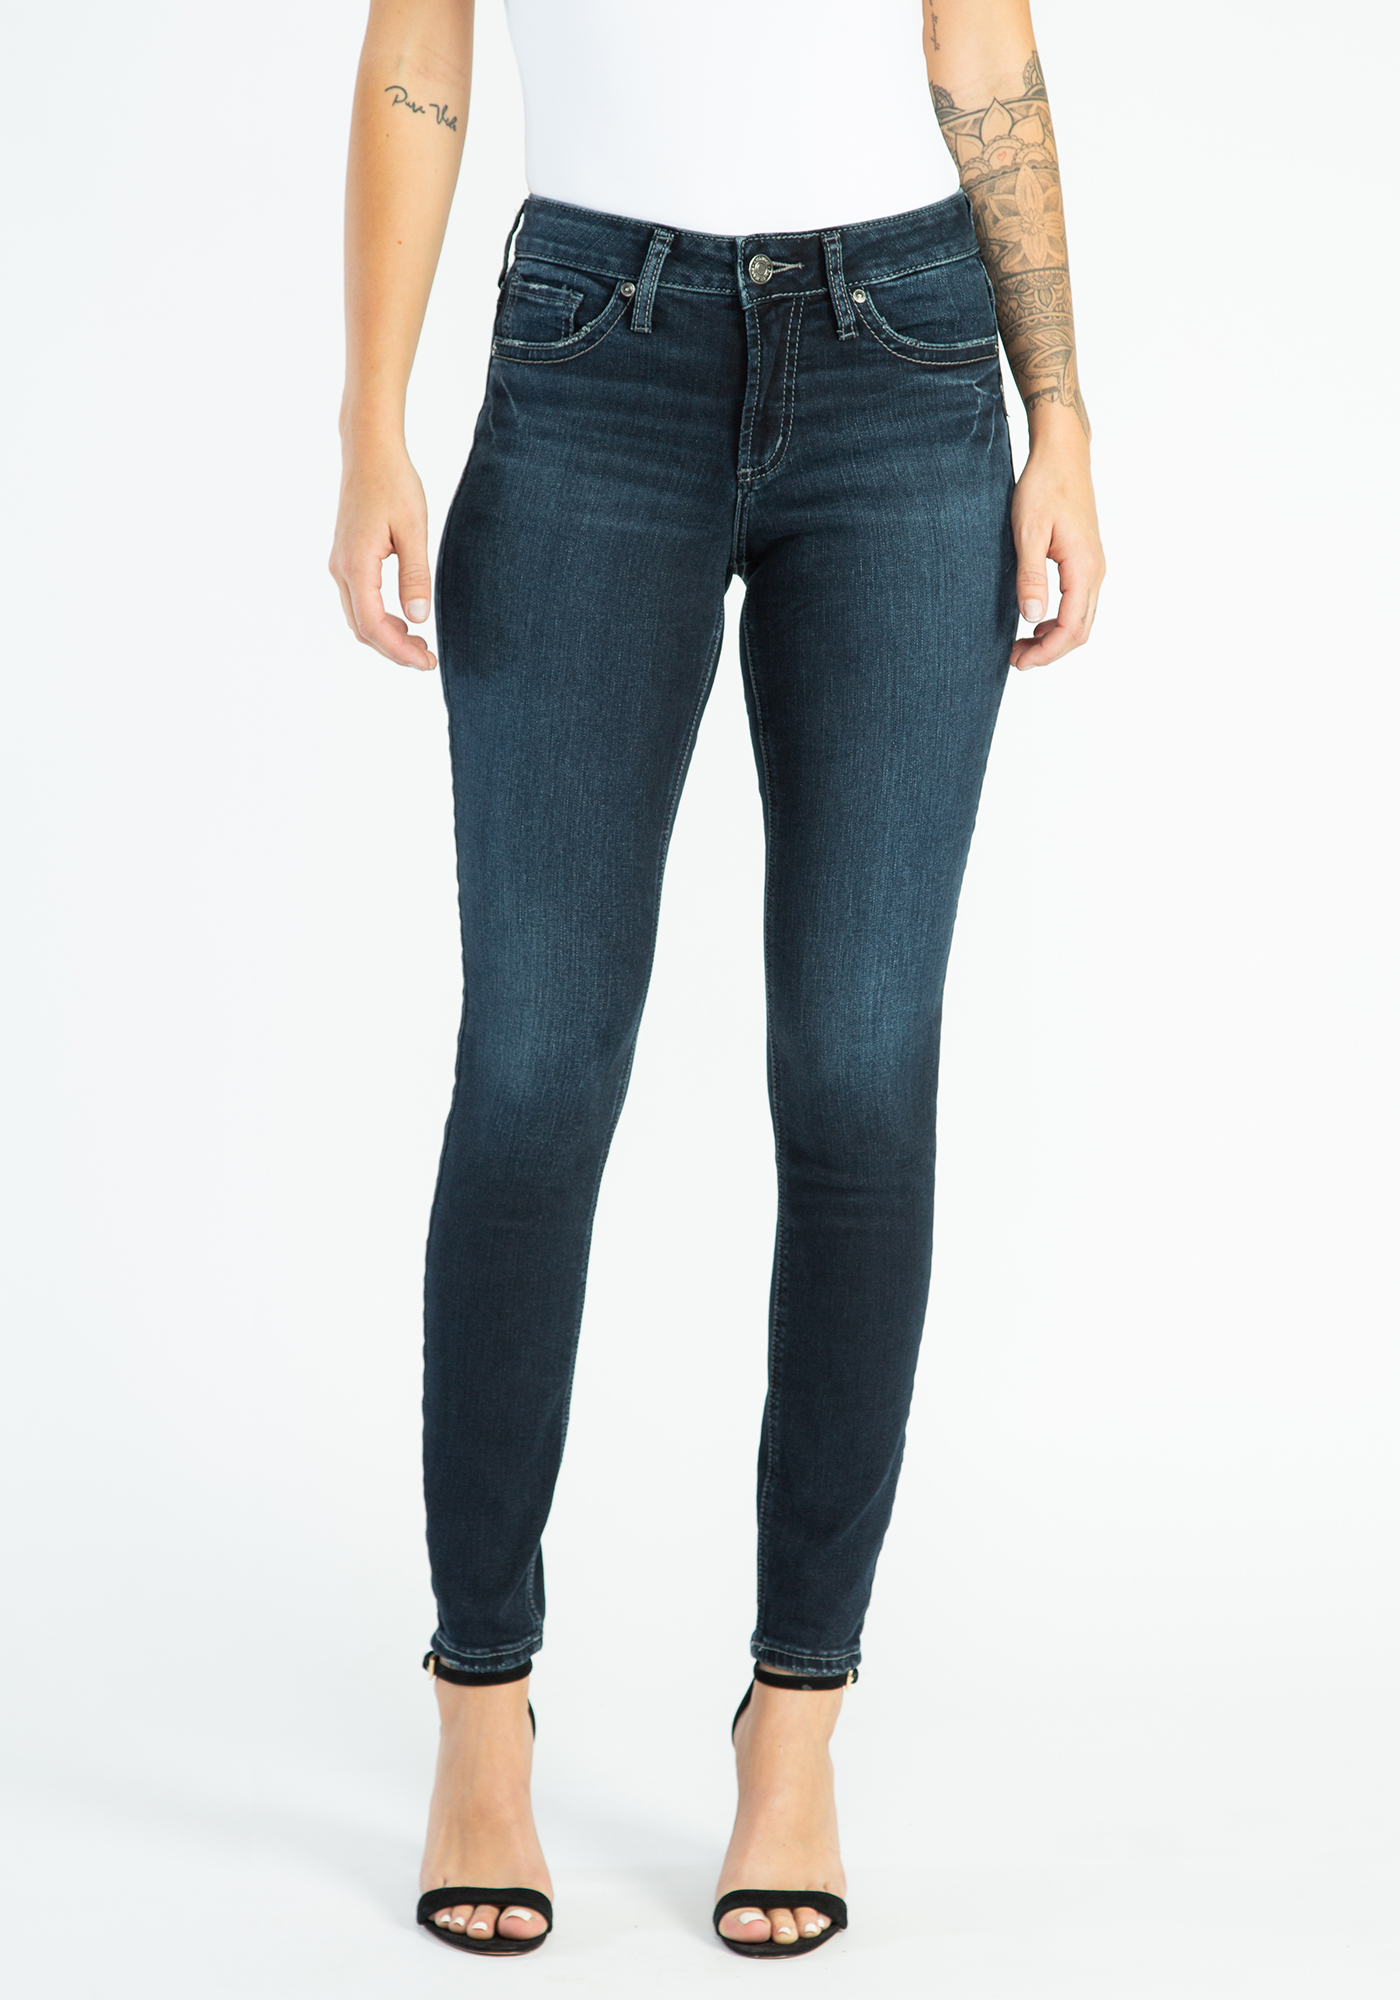 Buy Suki Mid Rise Skinny Jeans for CAD 74.00